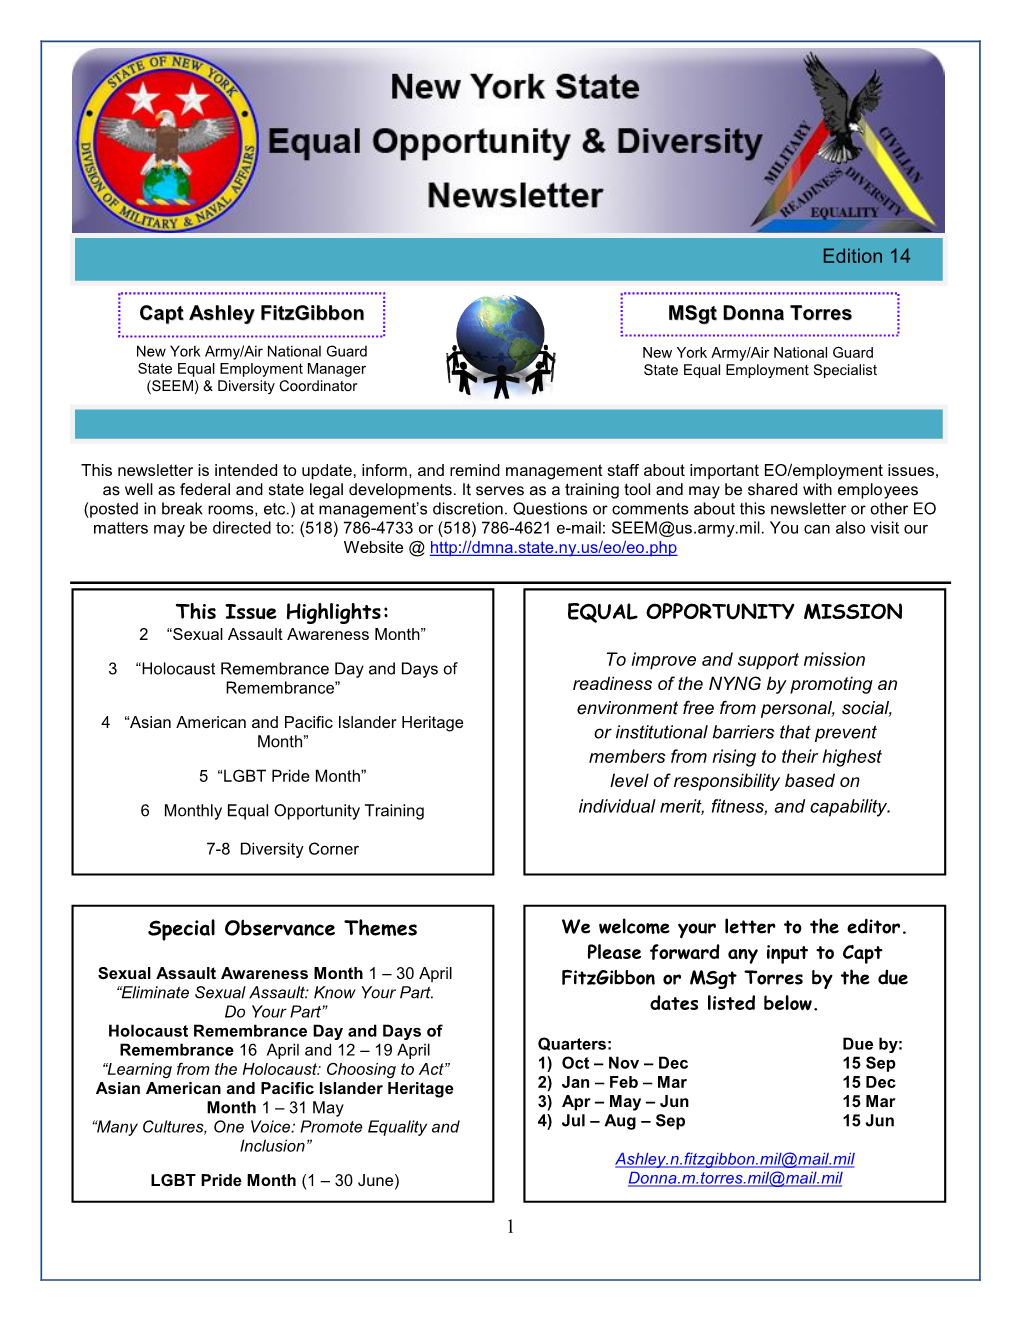 NYS Equal Opportunity & Diversity Newsletter, Apr-Jun, 2015